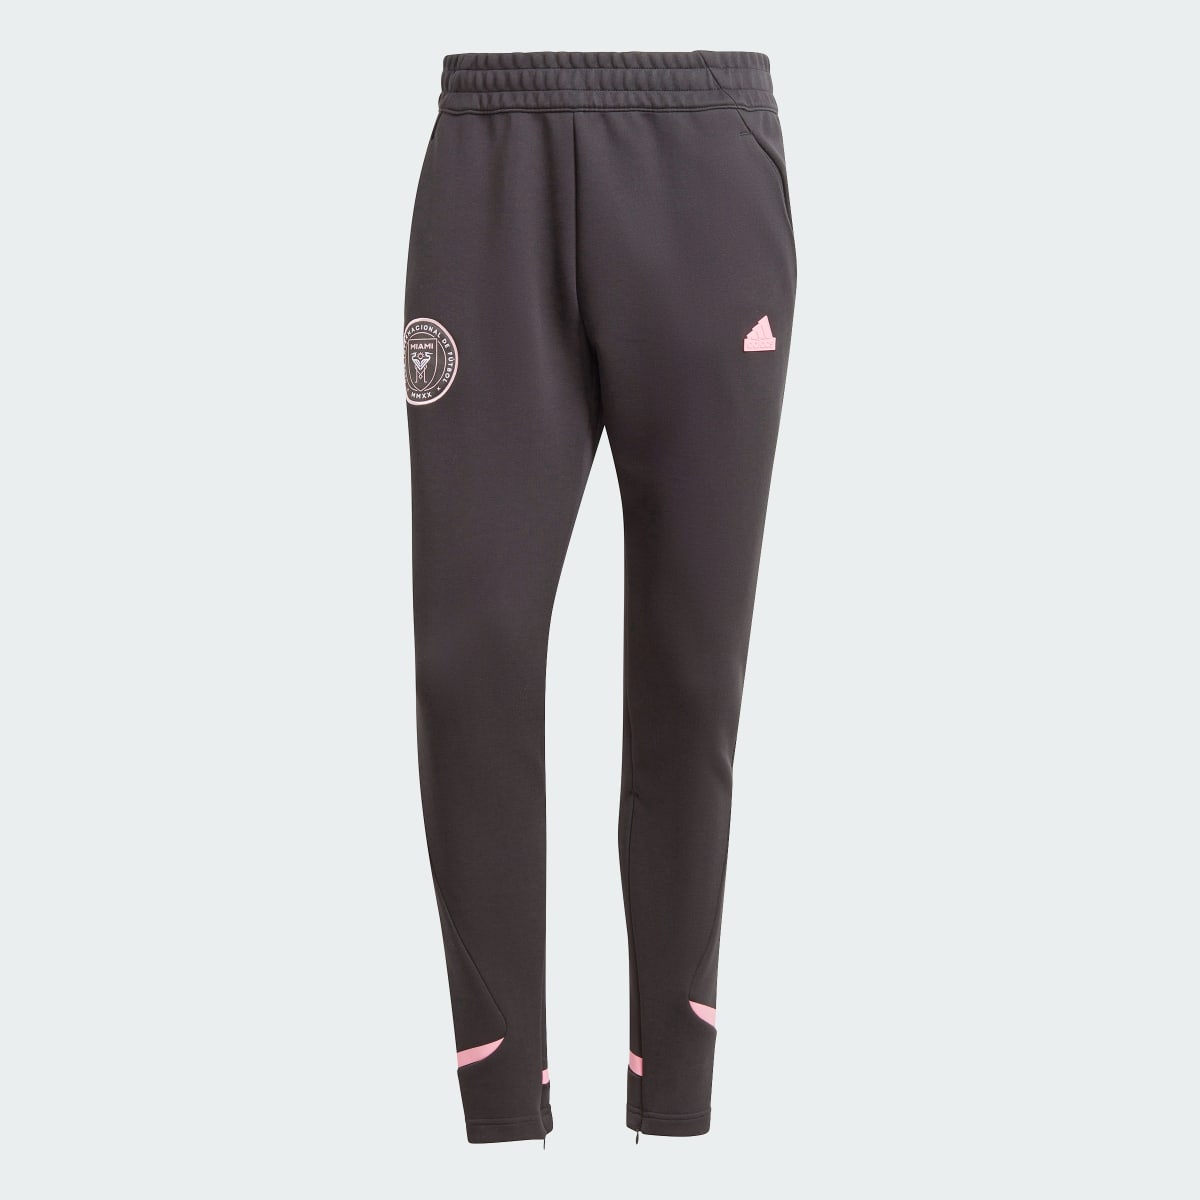 Adidas Inter Miami CF Designed for Gameday Travel Tracksuit Bottoms. 5